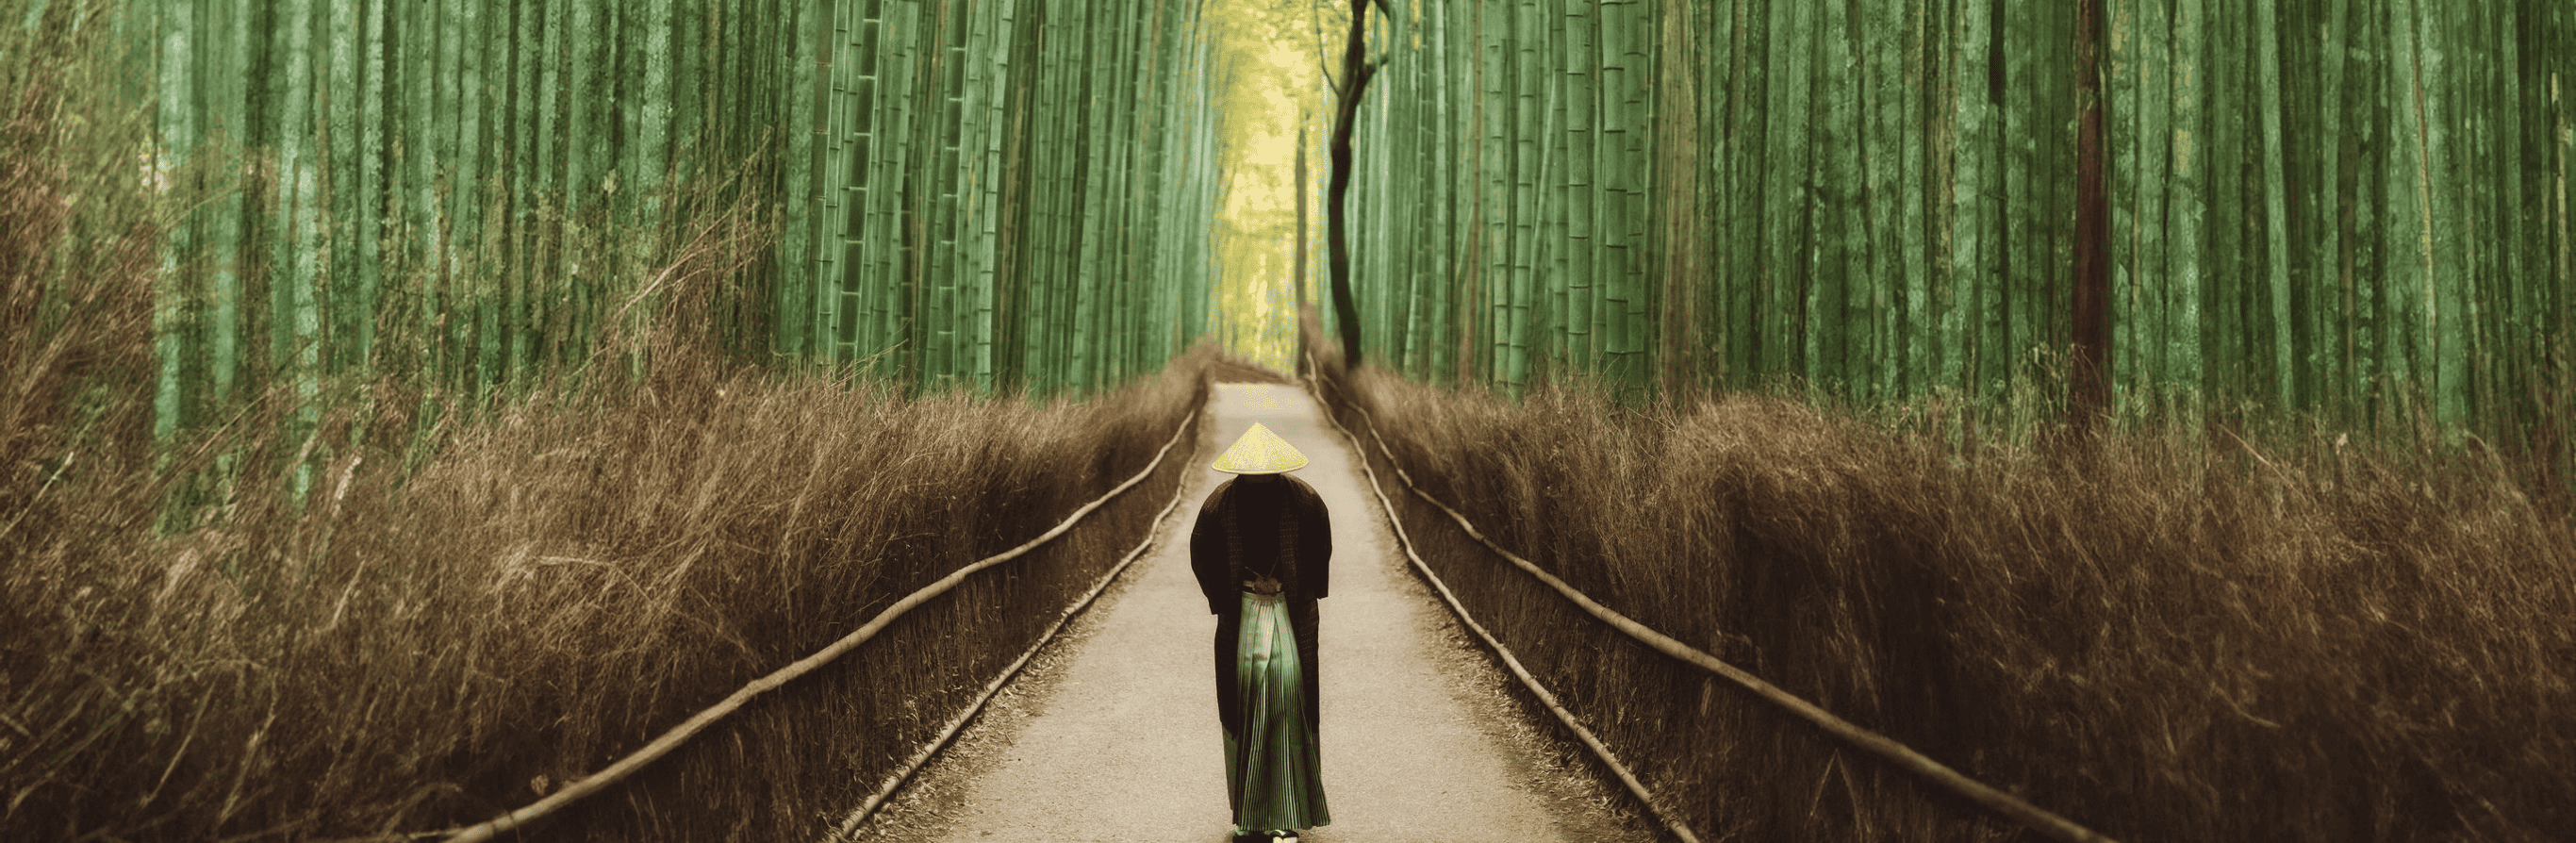 A person wearing a traditional conical hat stands at the center of a serene bamboo forest in Japan, with a narrow path leading through tall green bamboo stalks on either side.